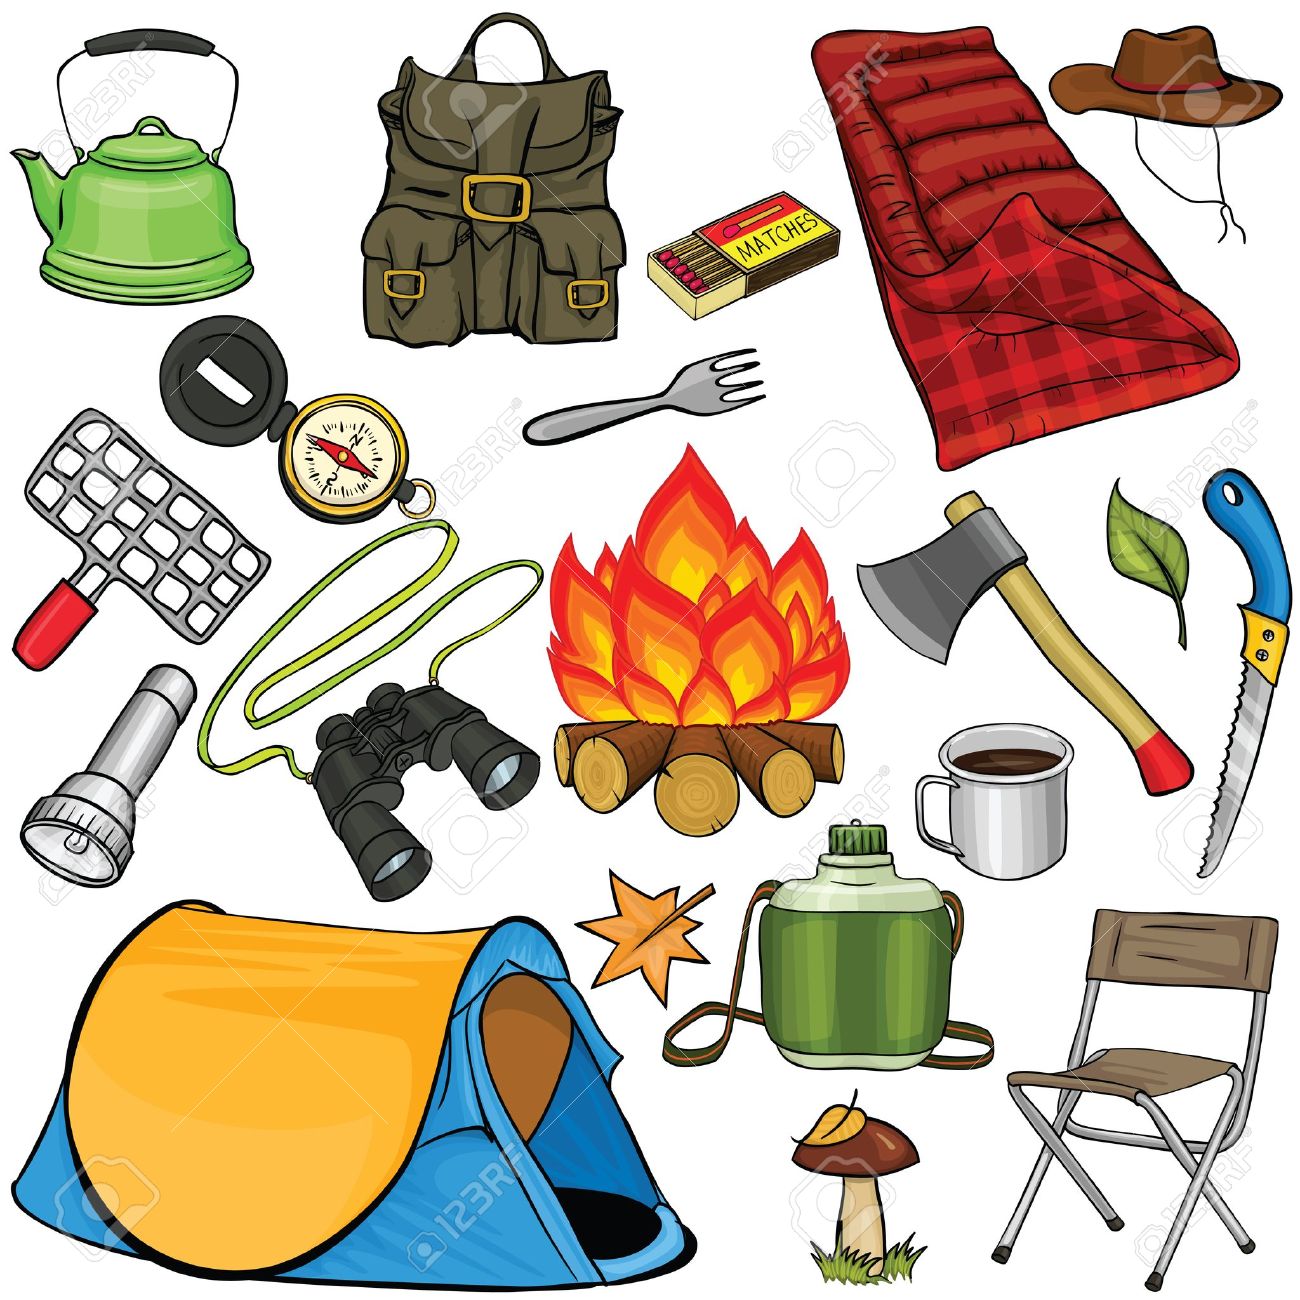 Hiking clothes clipart - Clipground